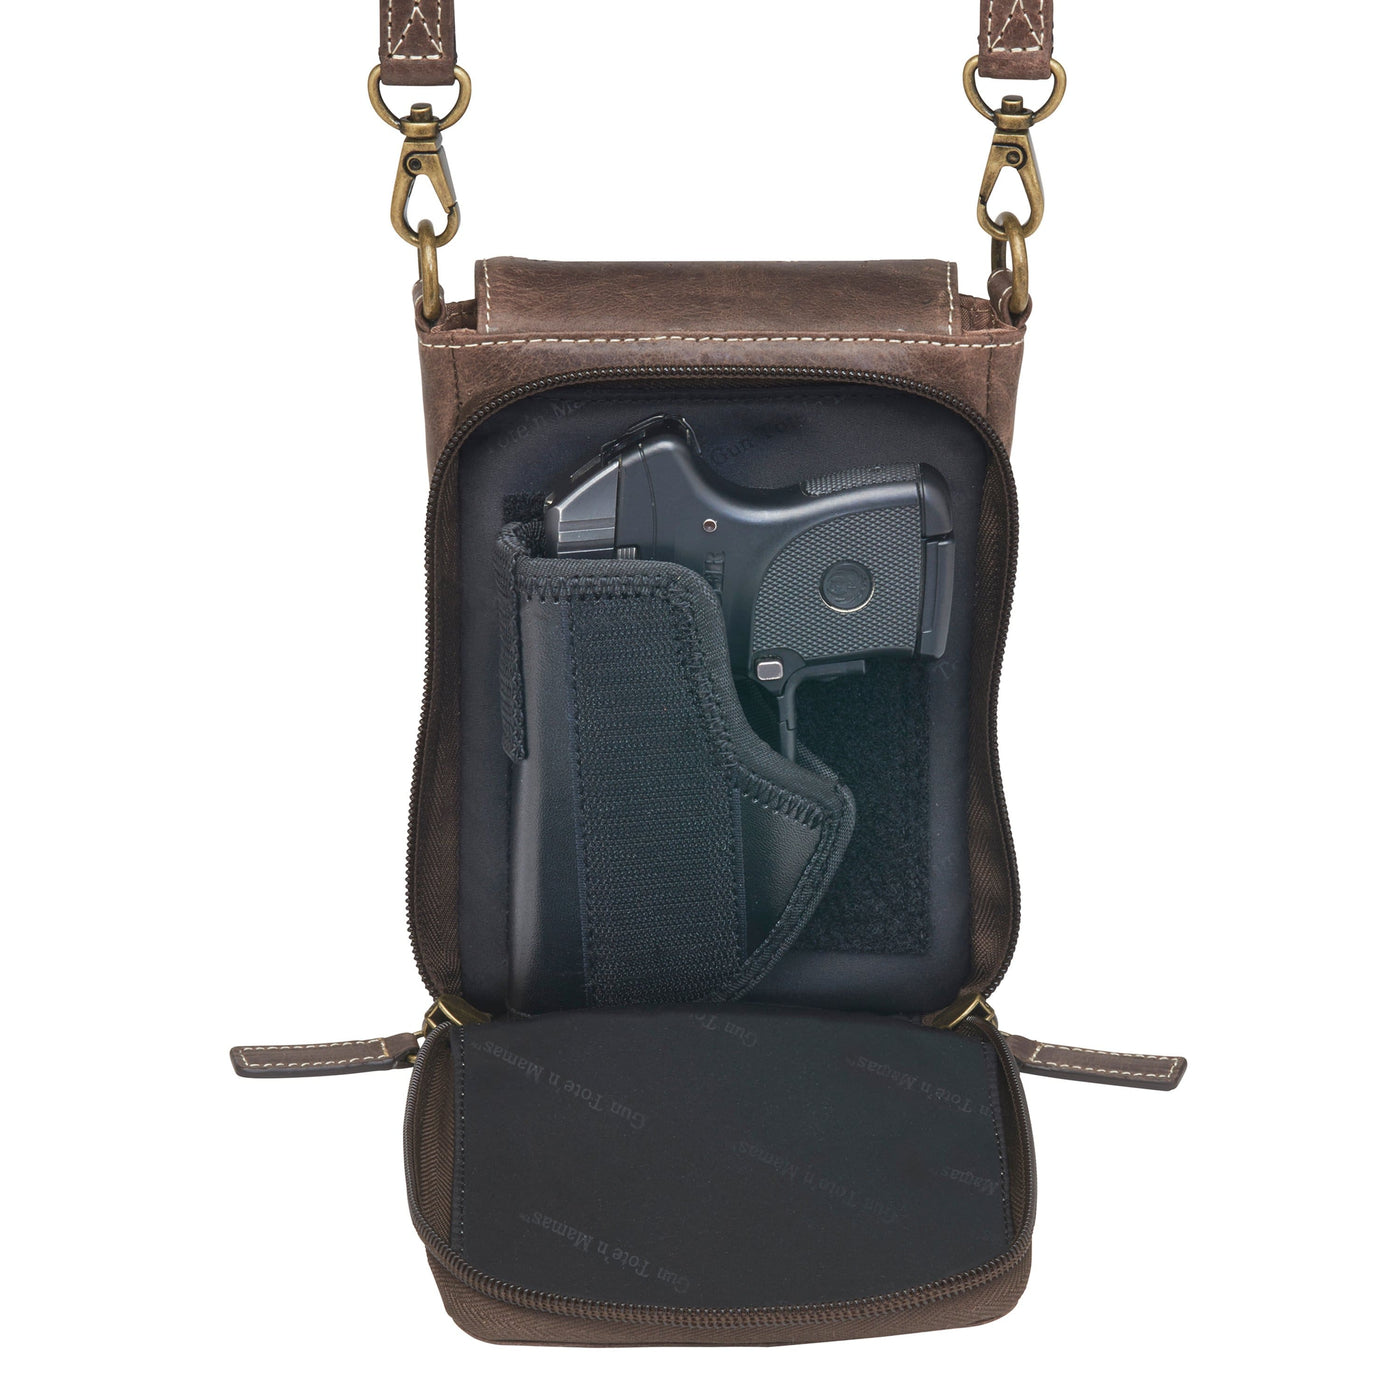 Concealed Carry  Gun Tote'n Mamas Purse & Phone Case Crossbody by Gun Tote'n Mama -  GTM/CZY-07